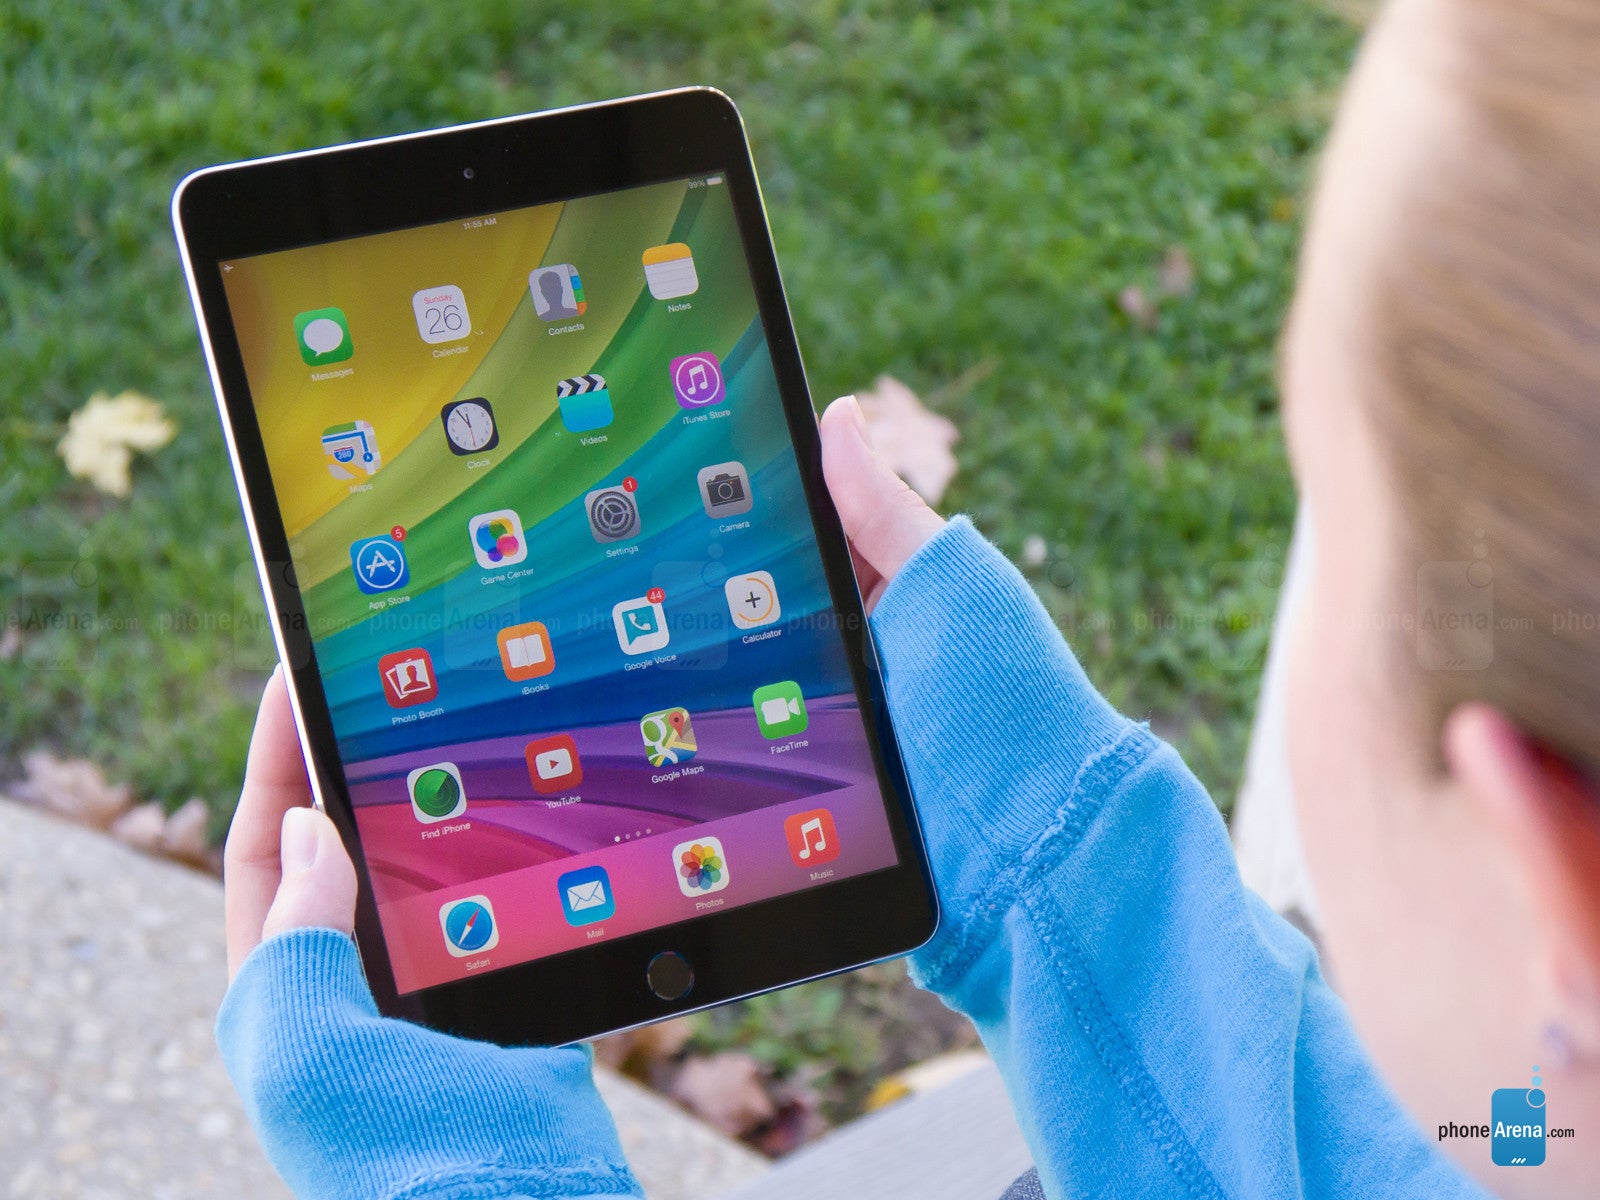 The tablet as we know it is reaching paralysis, and here's why